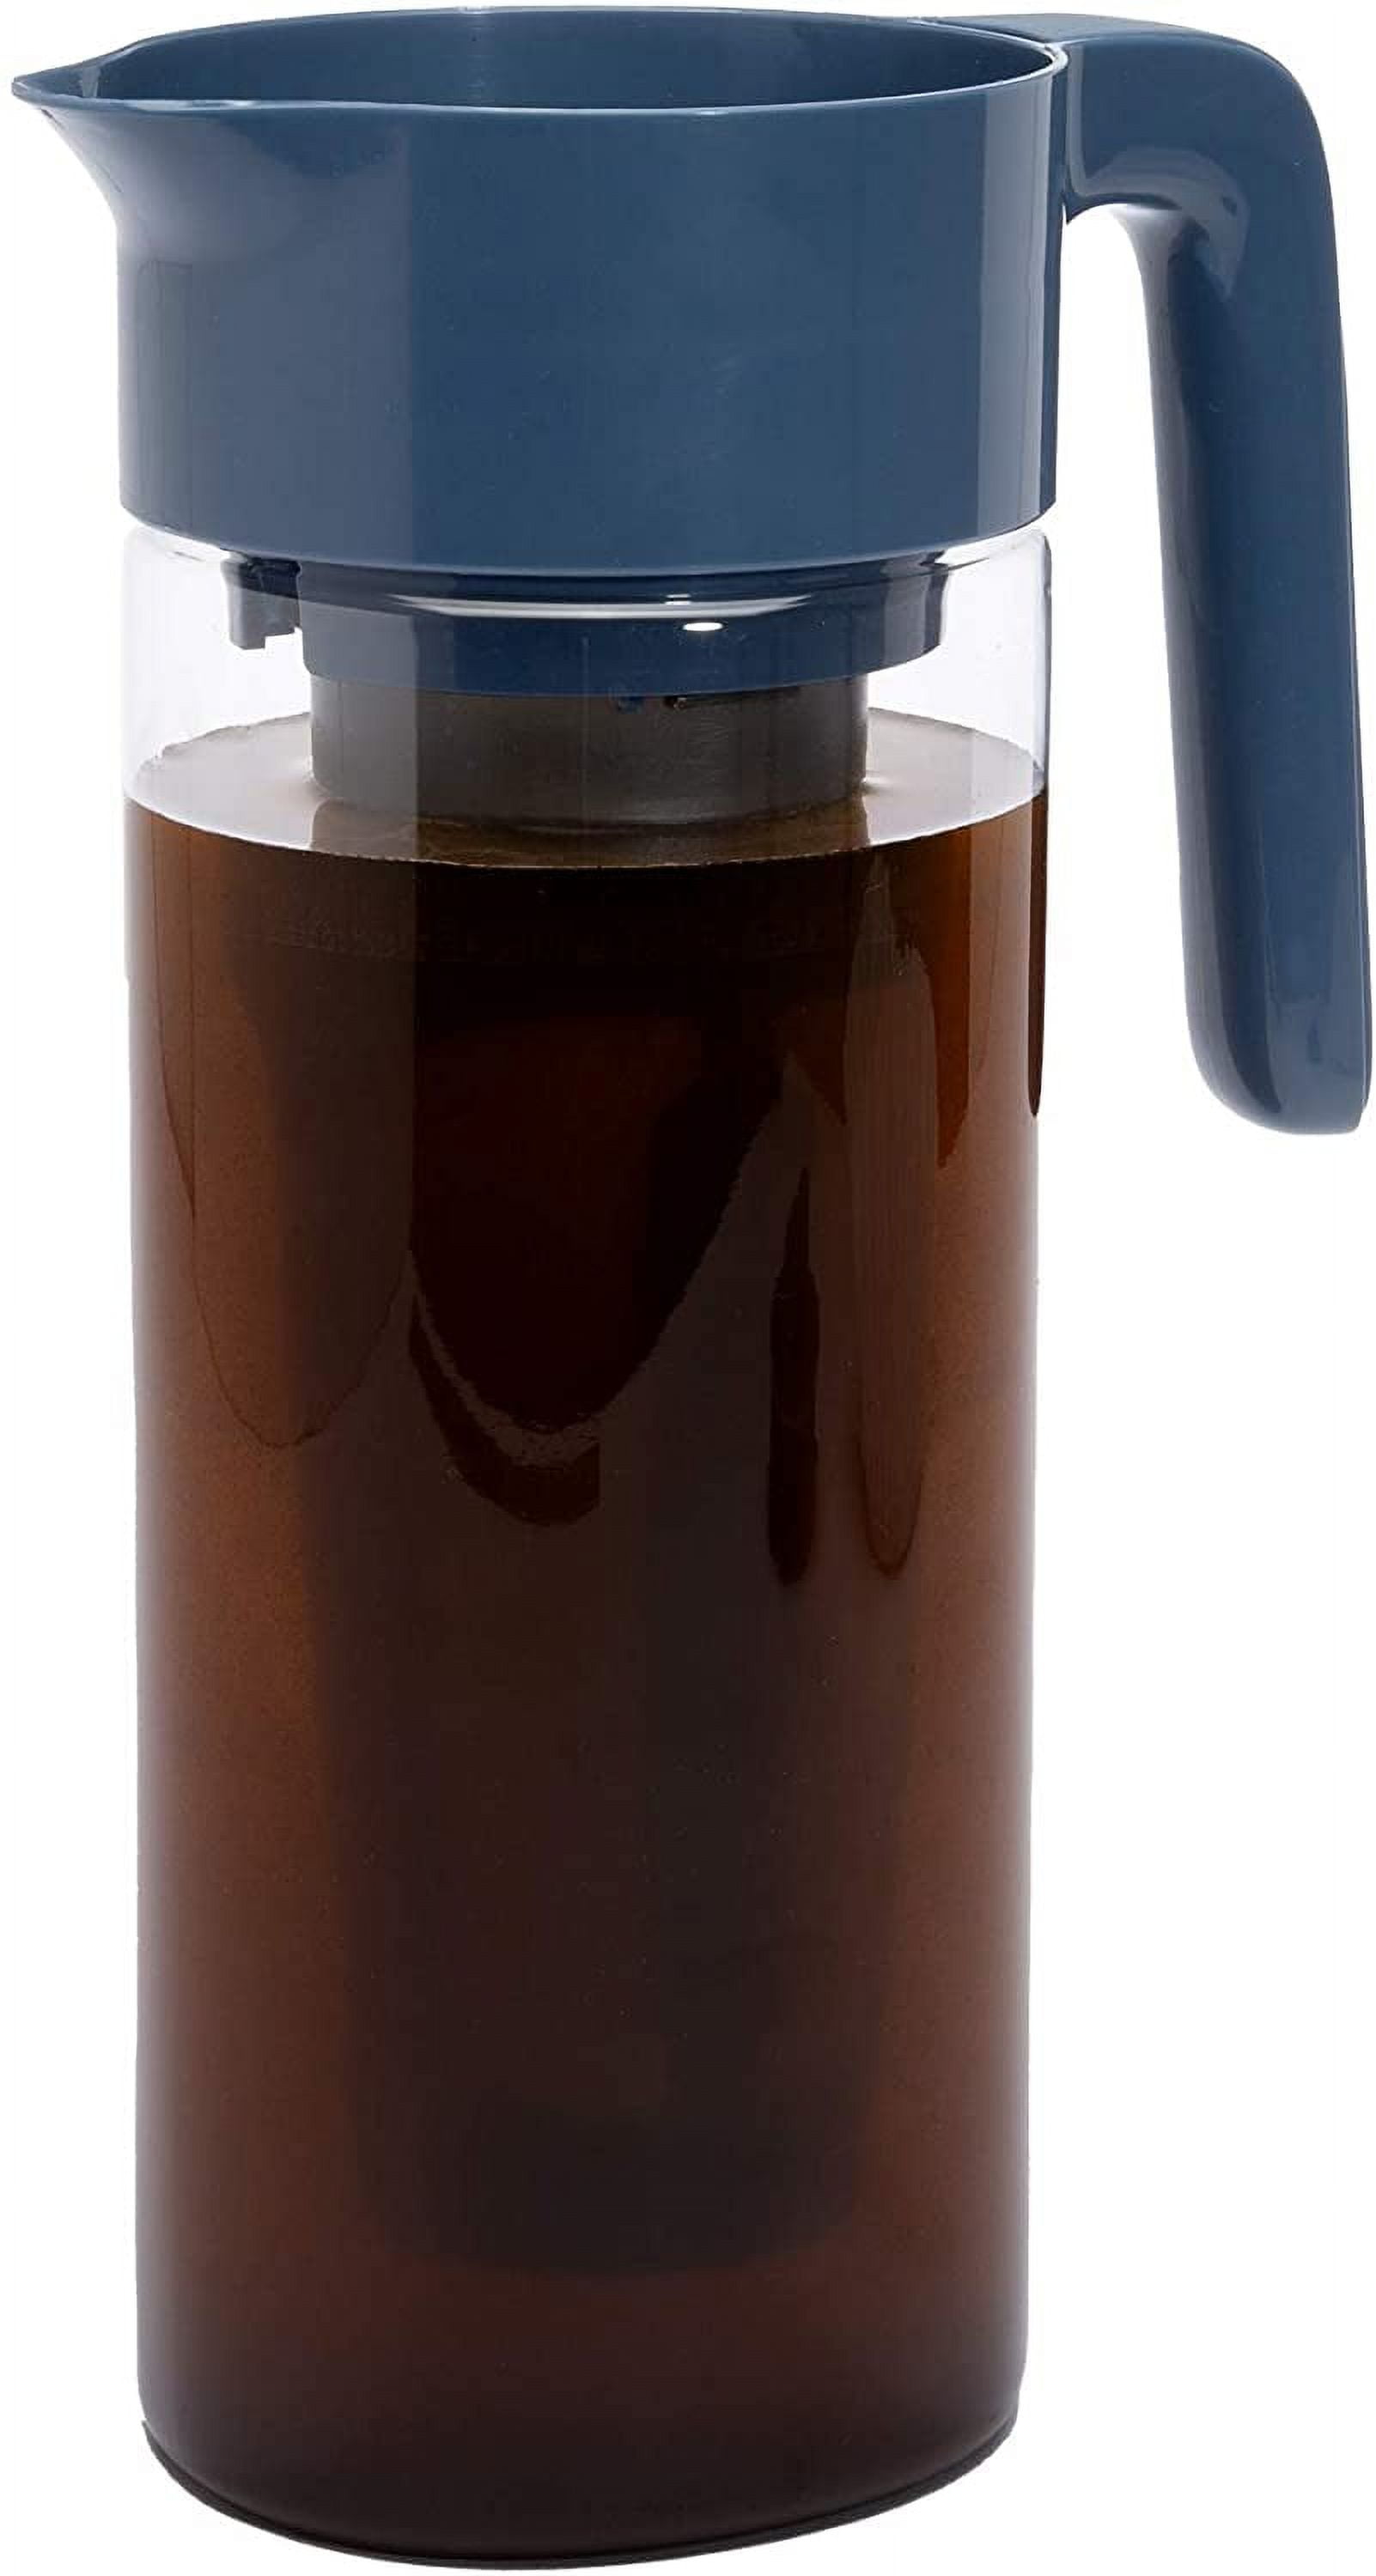 Cafe Du Chateau Brew Perfect Iced Coffee & Tea w/Our Cold Brew Coffee  Maker, Pitcher for Fridge (34oz) - Air Tight Seal, Measuring Label -  Stainless